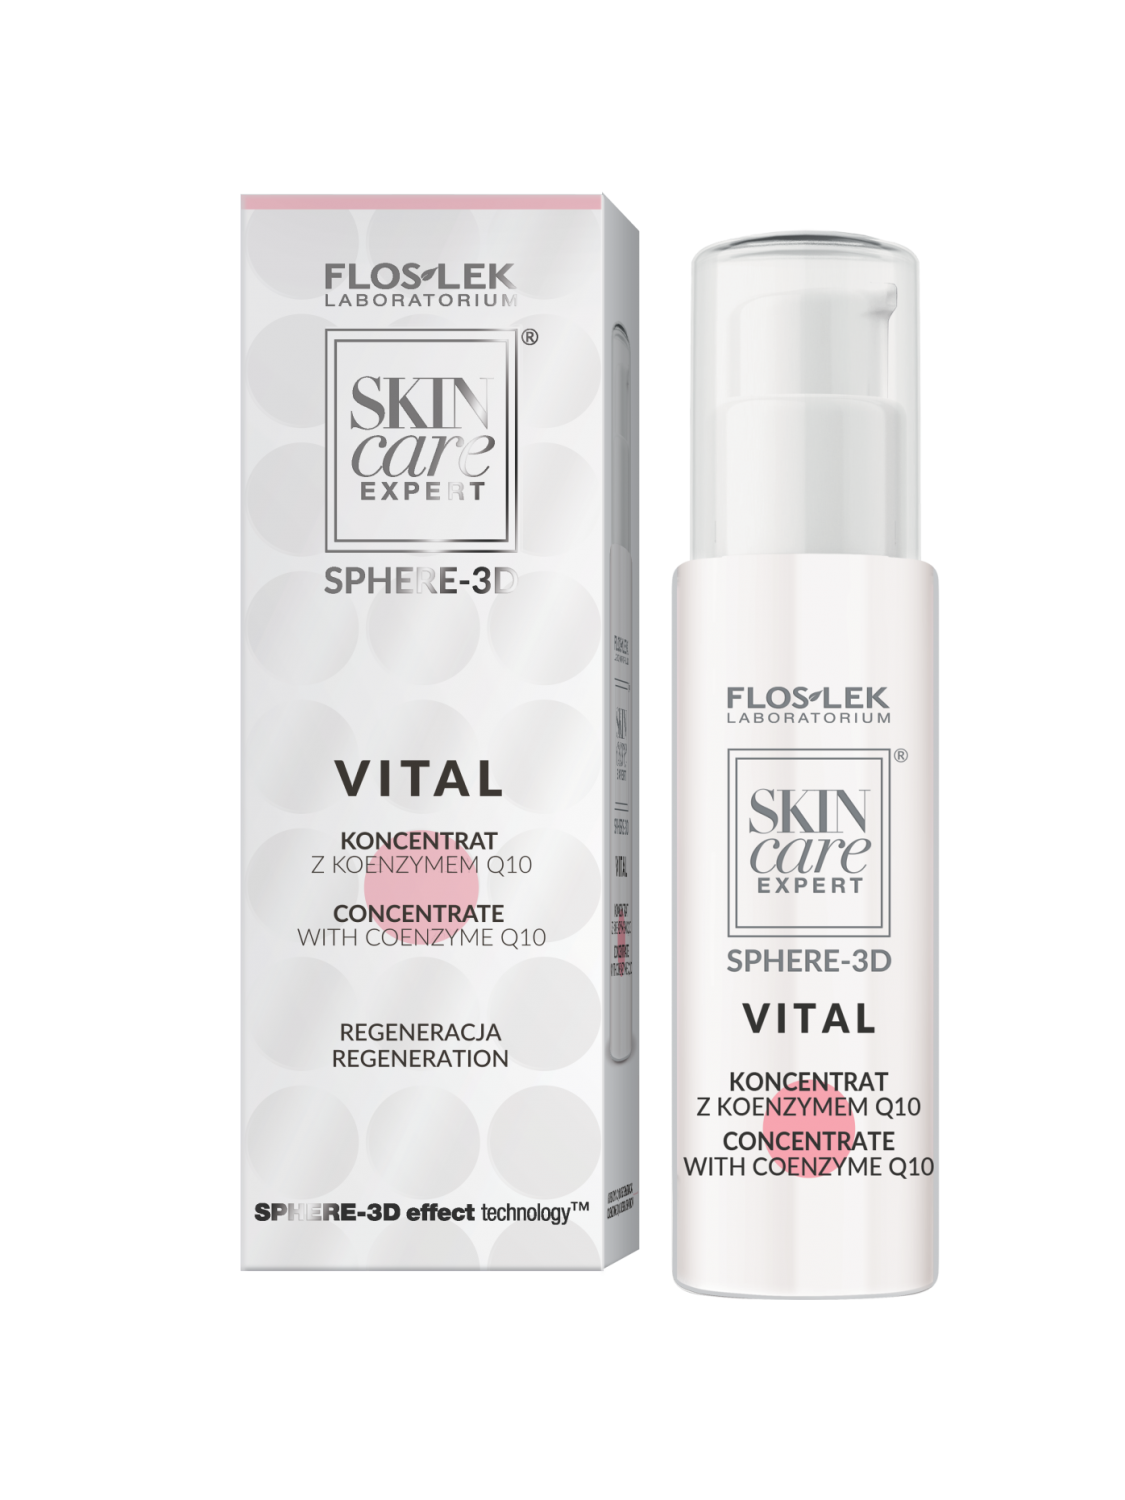 SKIN CARE EXPERT® SPHERE-3D Vital Concentrate with coenzyme Q10 - 30 ml - Floslek